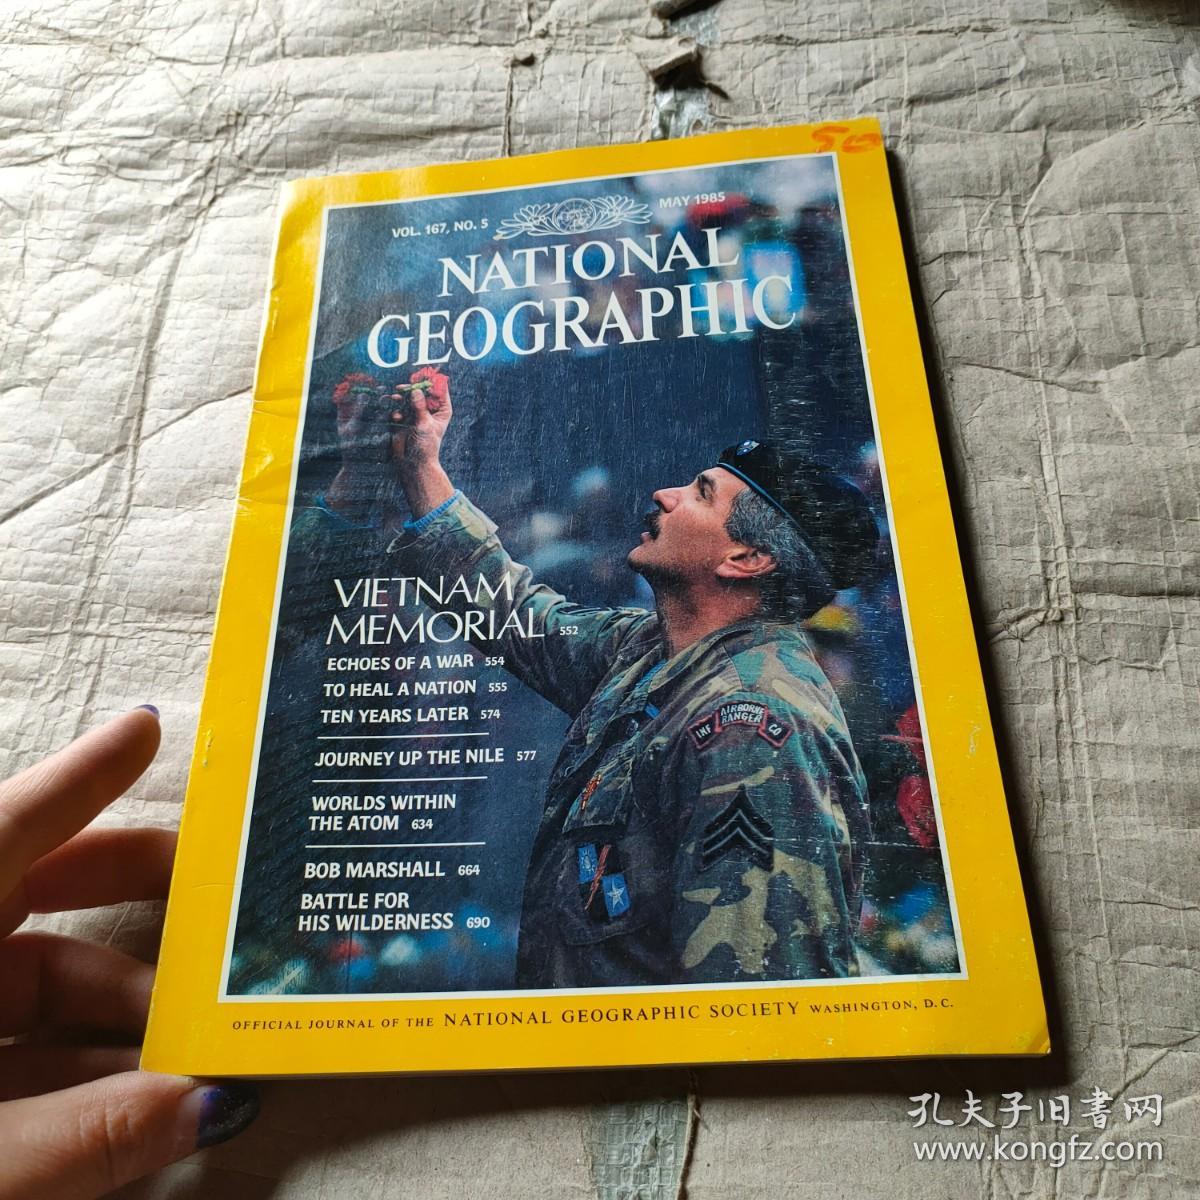 NATIONAL GEOGRAPHIC MAY 1985